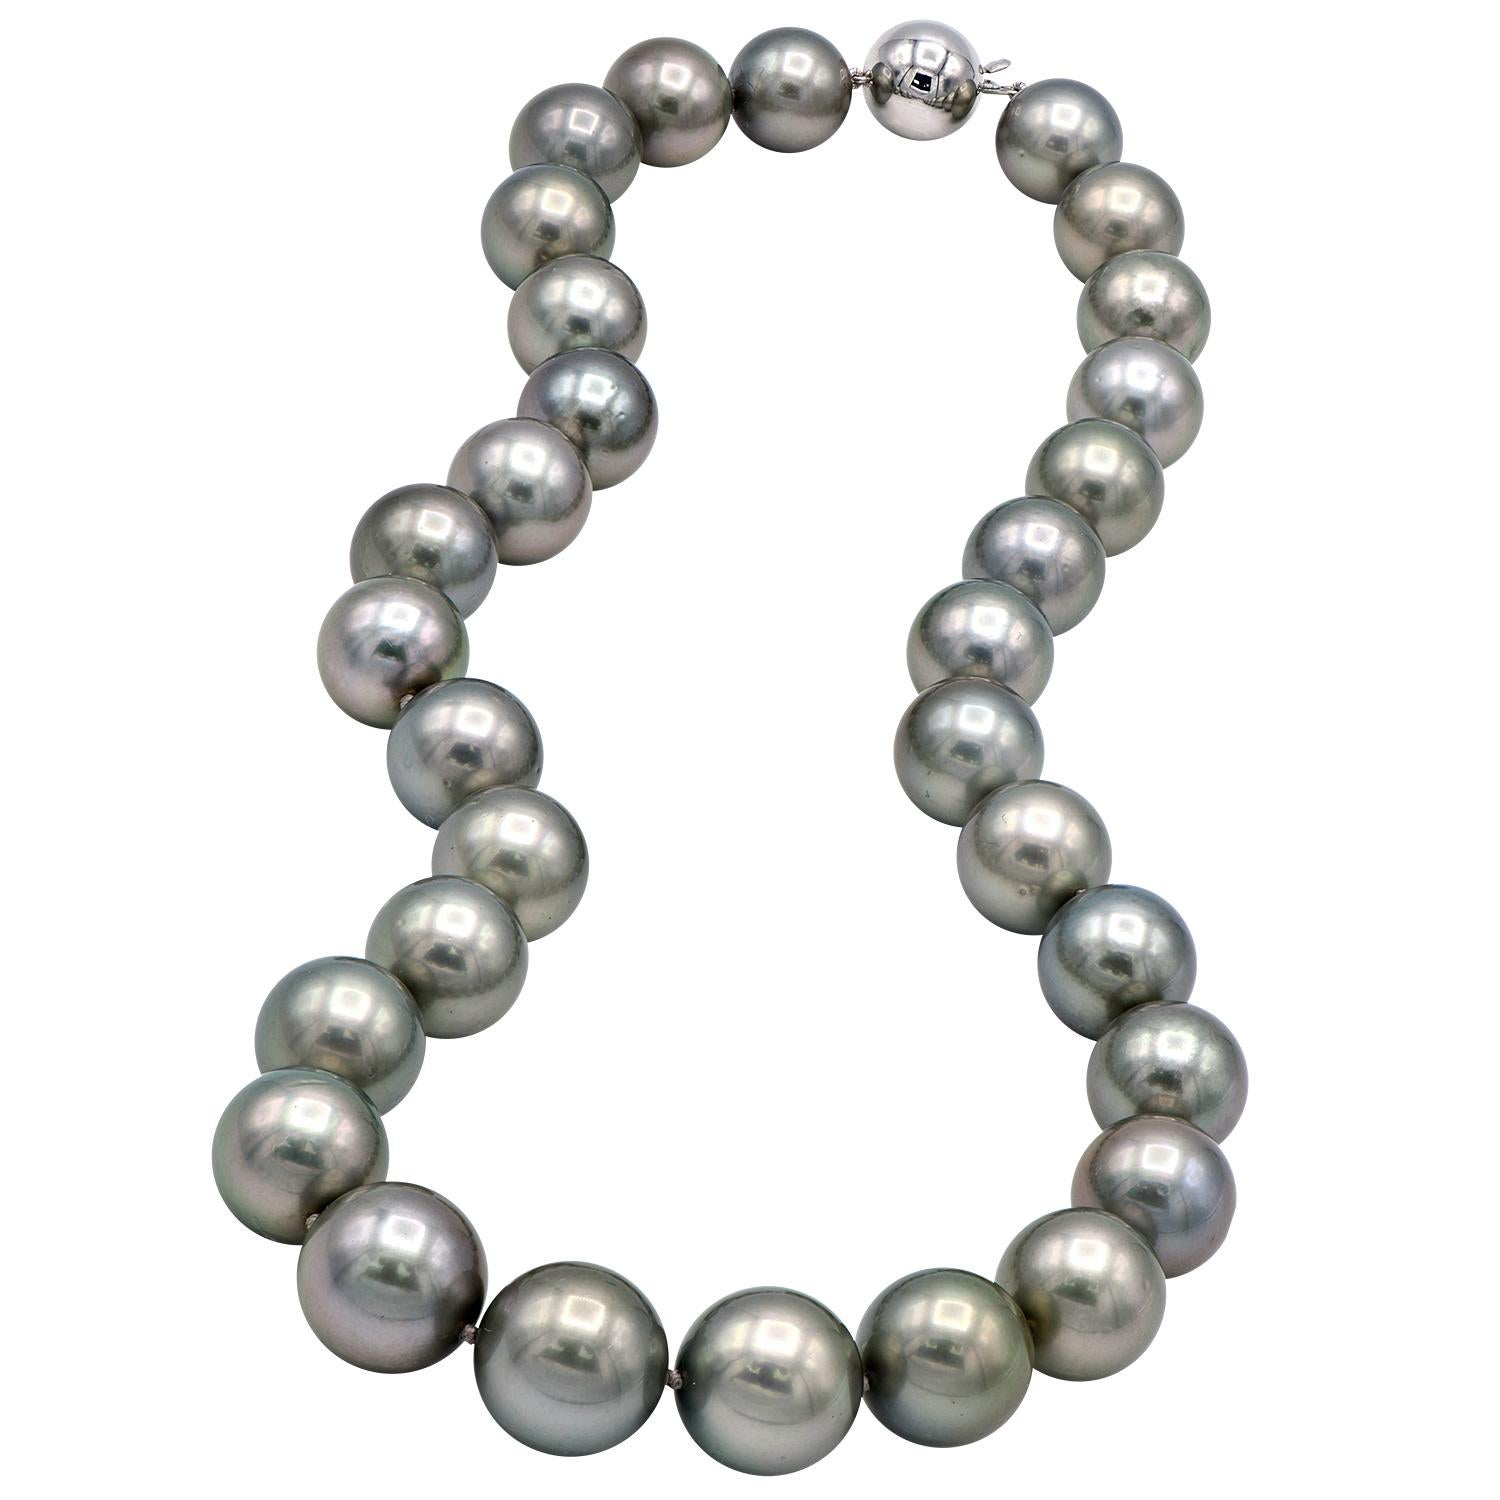 This Tahitian pearl necklace is made from 31 beautiful silver pearls with gorgeous undertones. The pearls are graduated in size from 12.1-14.9mm making a stunning 18 inch strand. The pearls are expertly strung with a double knot in between each